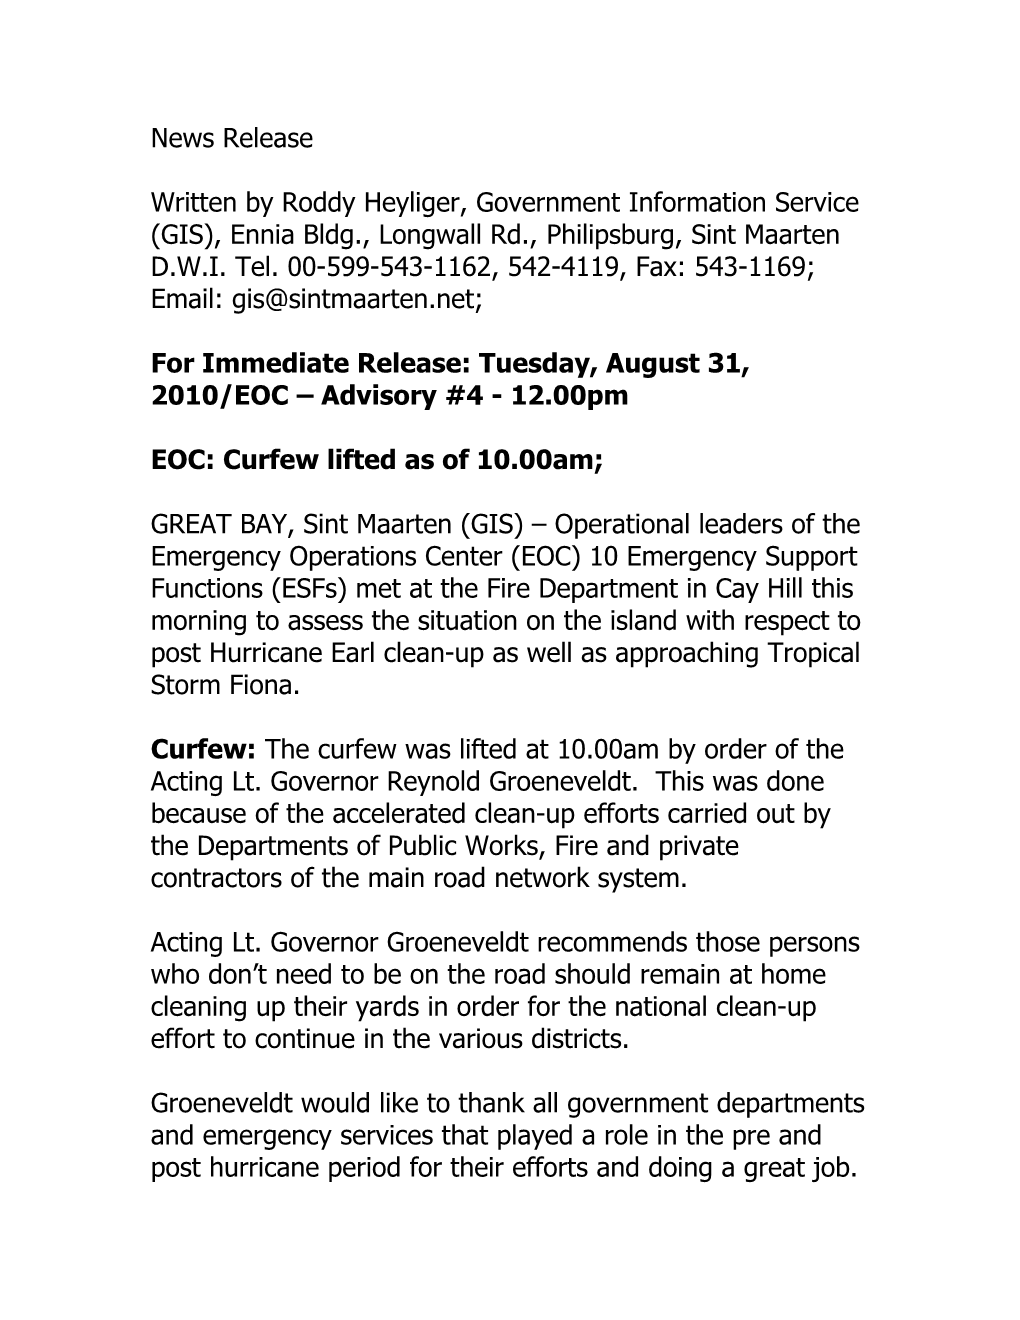 For Immediate Release: Tuesday, August31, 2010/EOC Advisory #4 - 12.00Pm